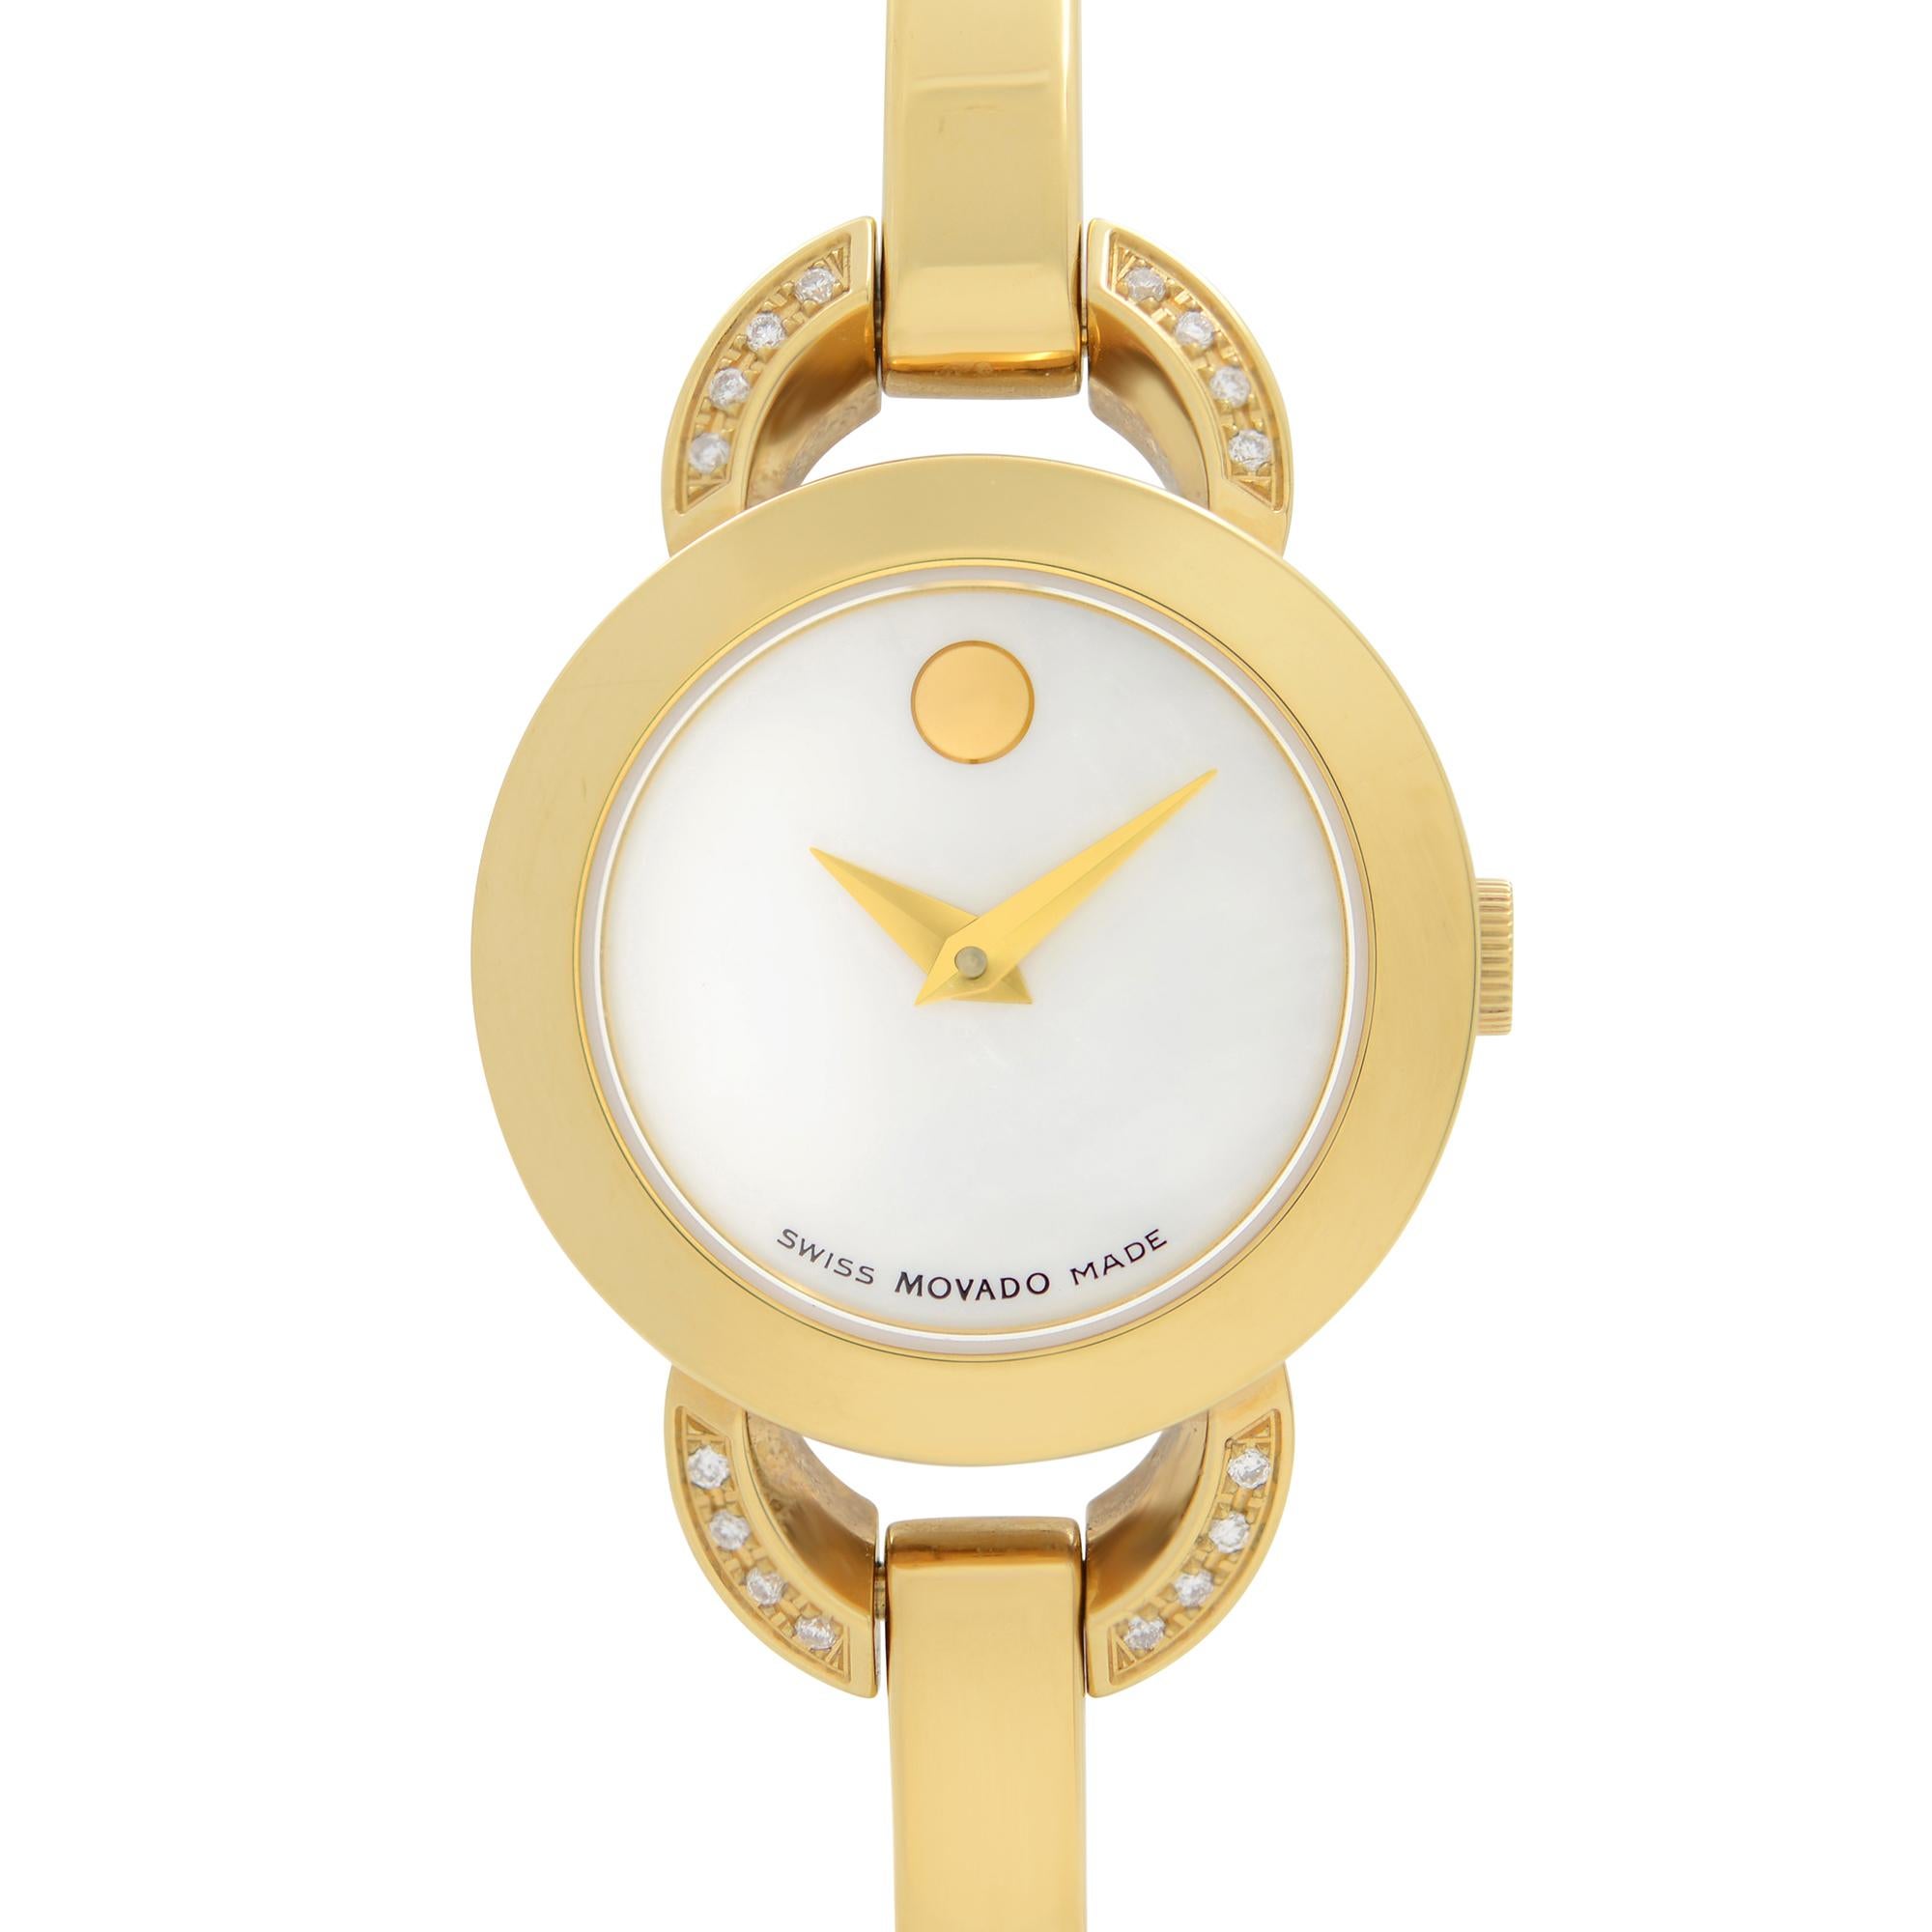 Pre-owned Movado Rondiro Gold-Tone Stainless Steel MOP Dial Quartz Ladies Watch 0606889. The Watch Has Minor Scratches. This Beautiful Timepiece Features: Yellow Gold PVD Stainless Steel Case, Bracelet, and Bezel. White Mother of Pearl Dial with